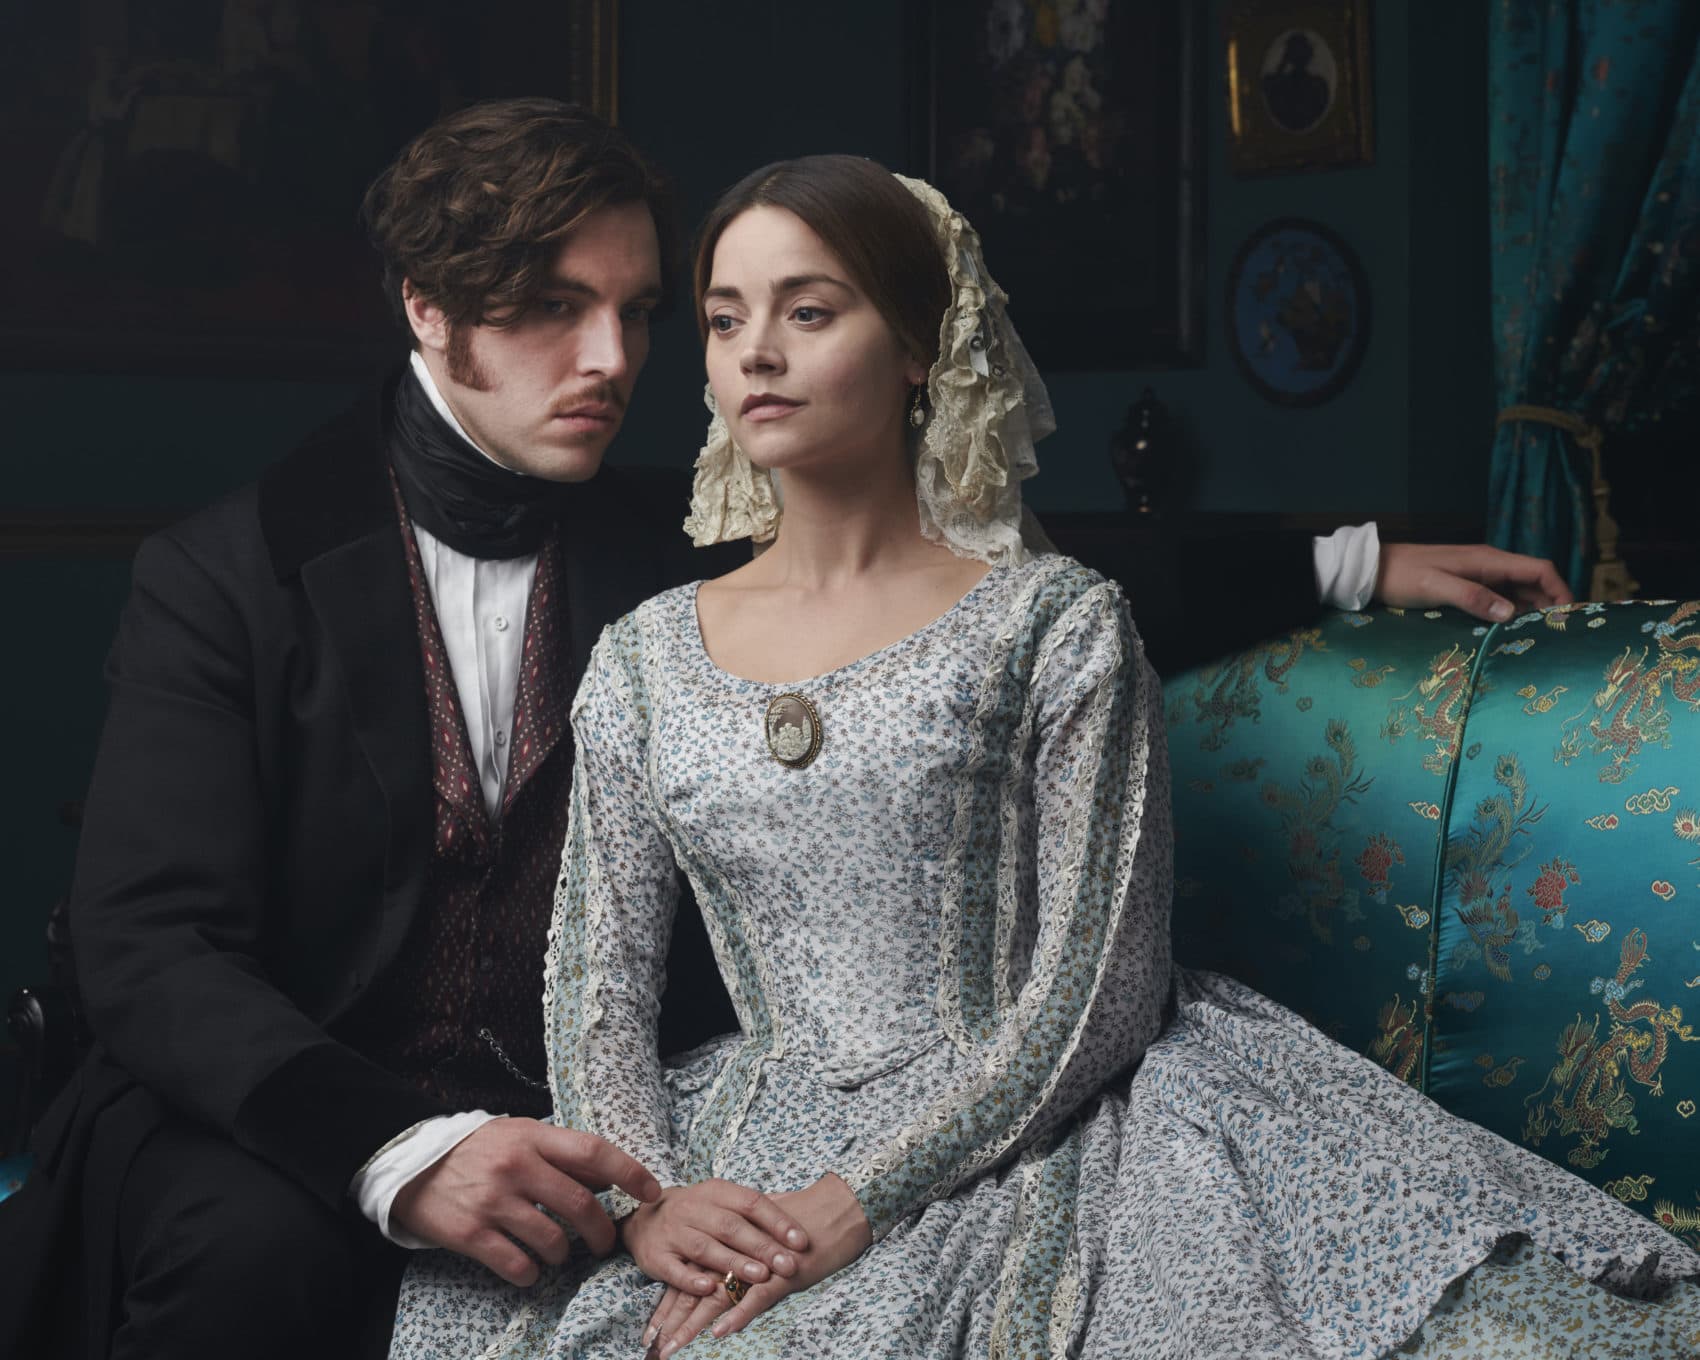 Season 3 of &quot;Victoria&quot; premieres Sunday, Jan. 13, on PBS Masterpiece. Shown from left to right: Tom Hughes as Prince Albert and Jenna Coleman as Queen Victoria. (Courtesy of ITV Plc for Masterpiece)